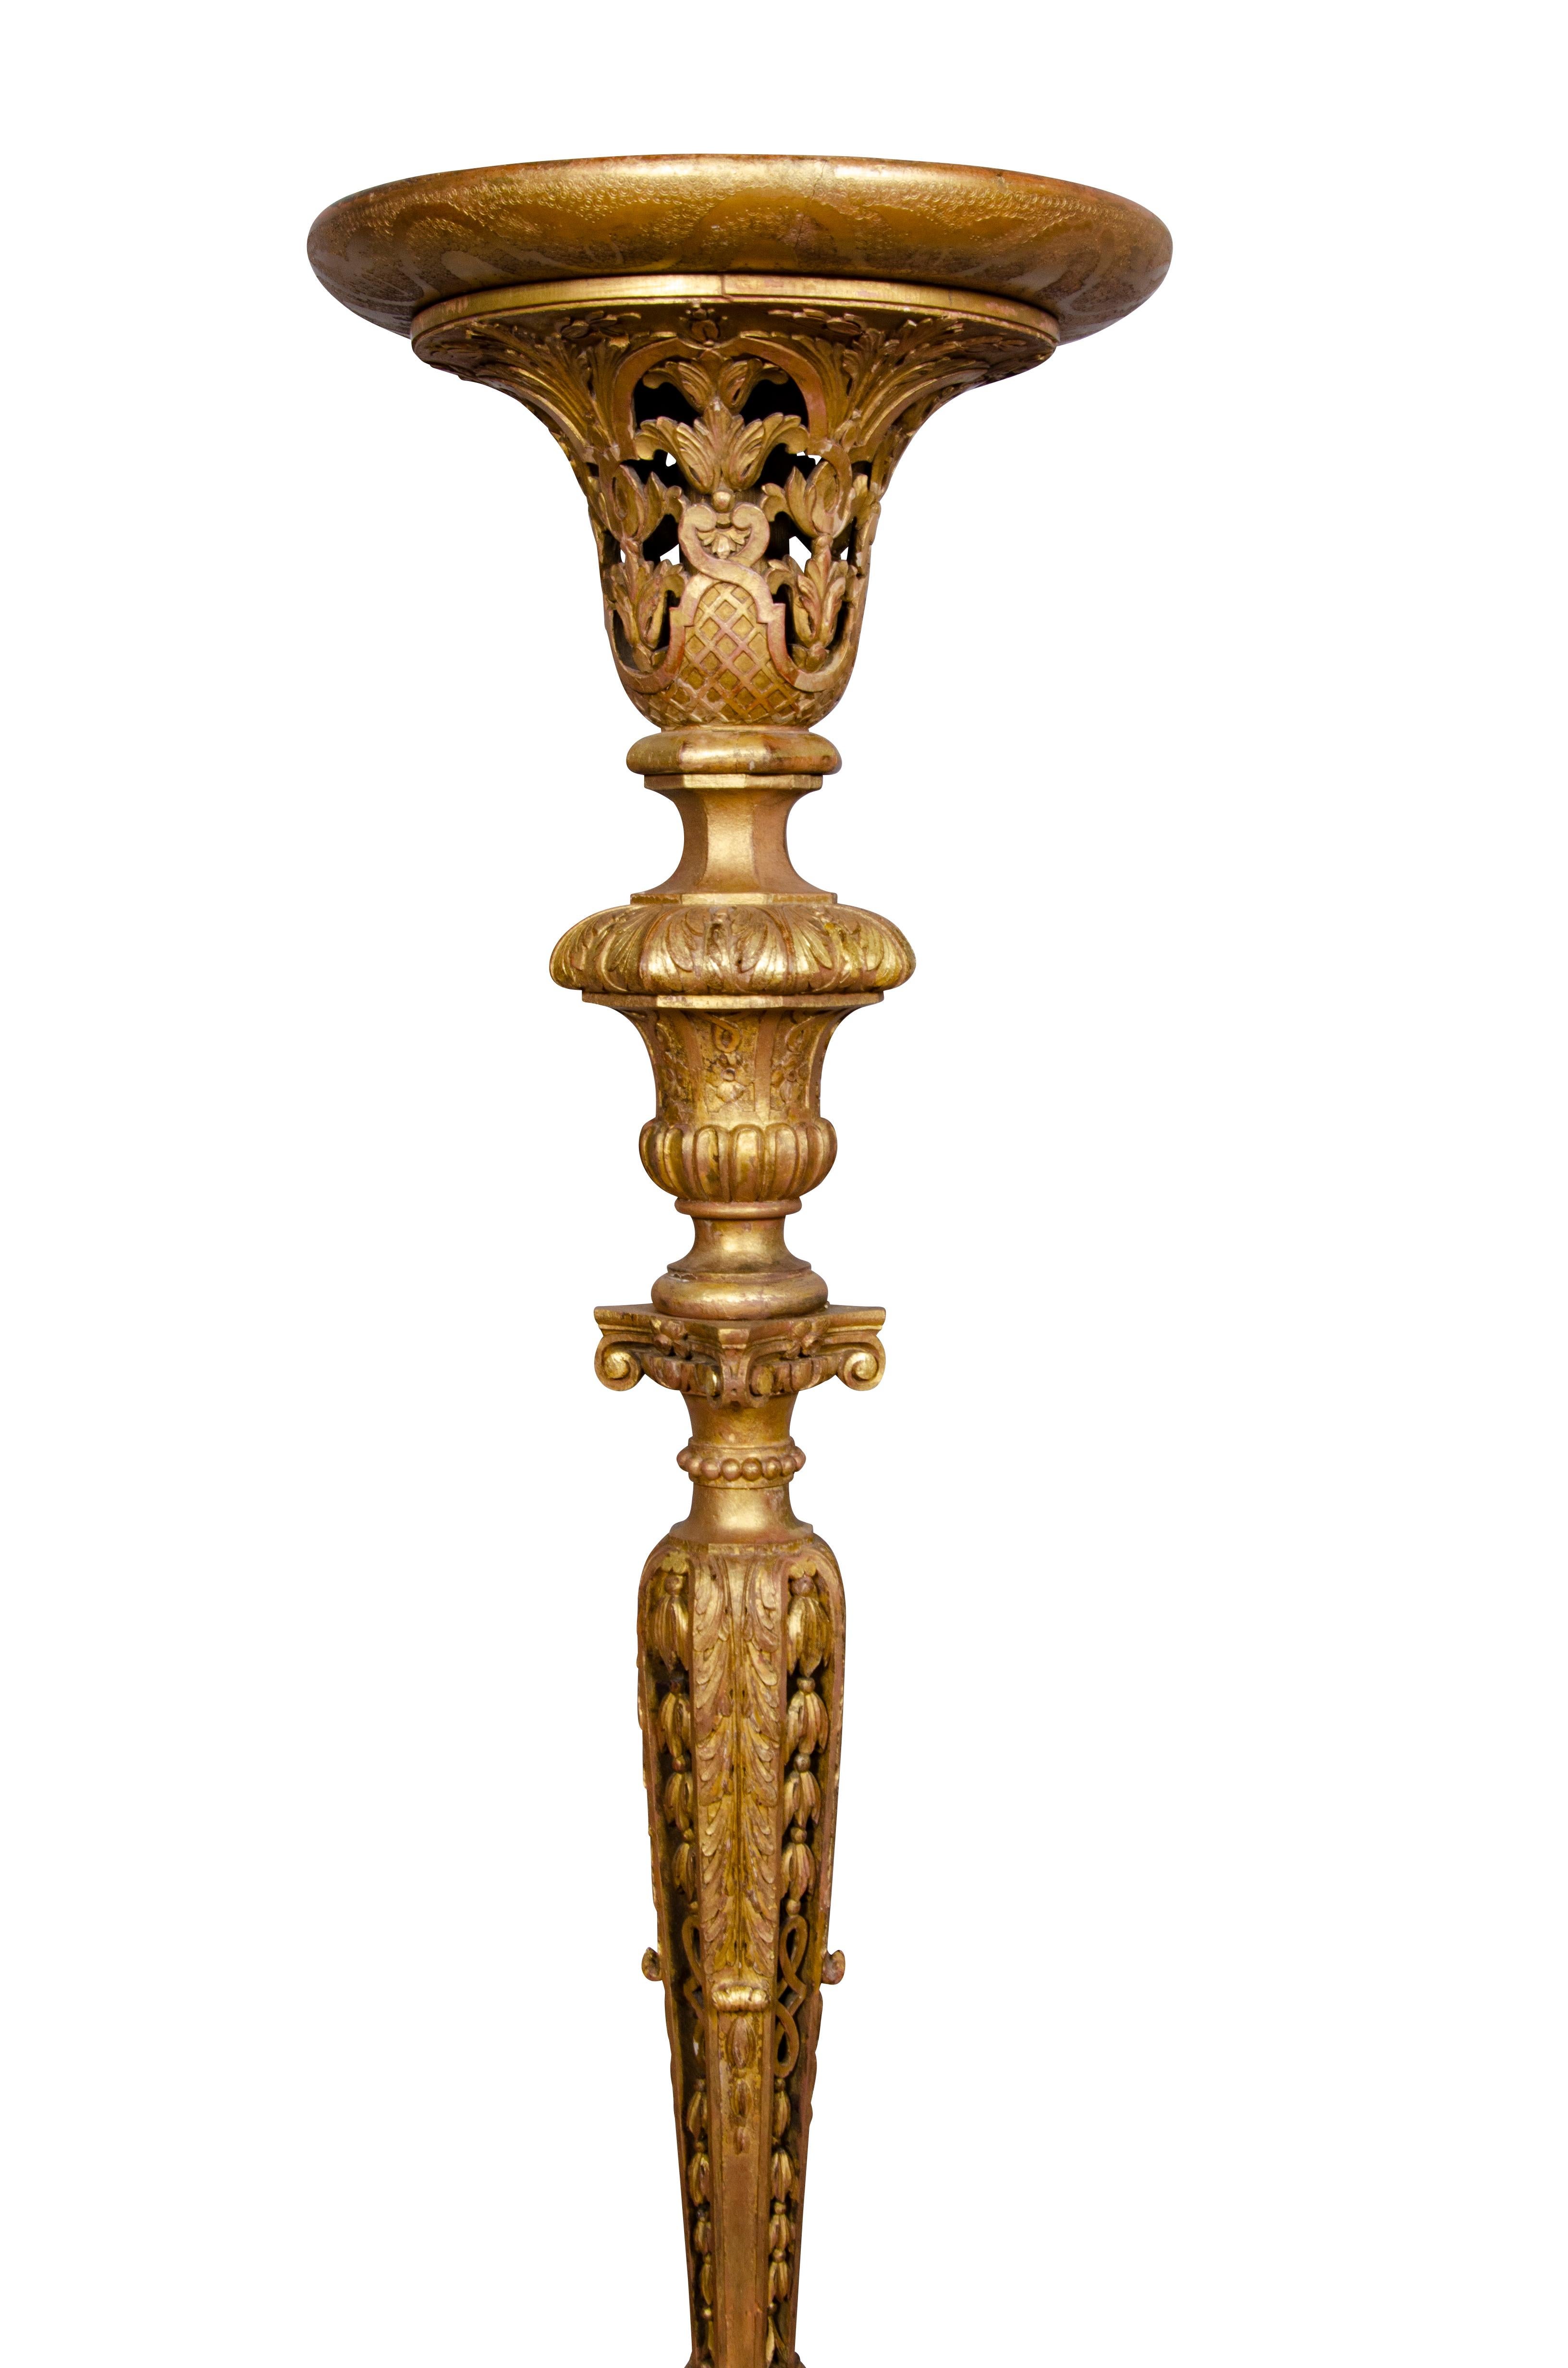 With dished circular tops with a carved and pierced support ending on three carved legs.